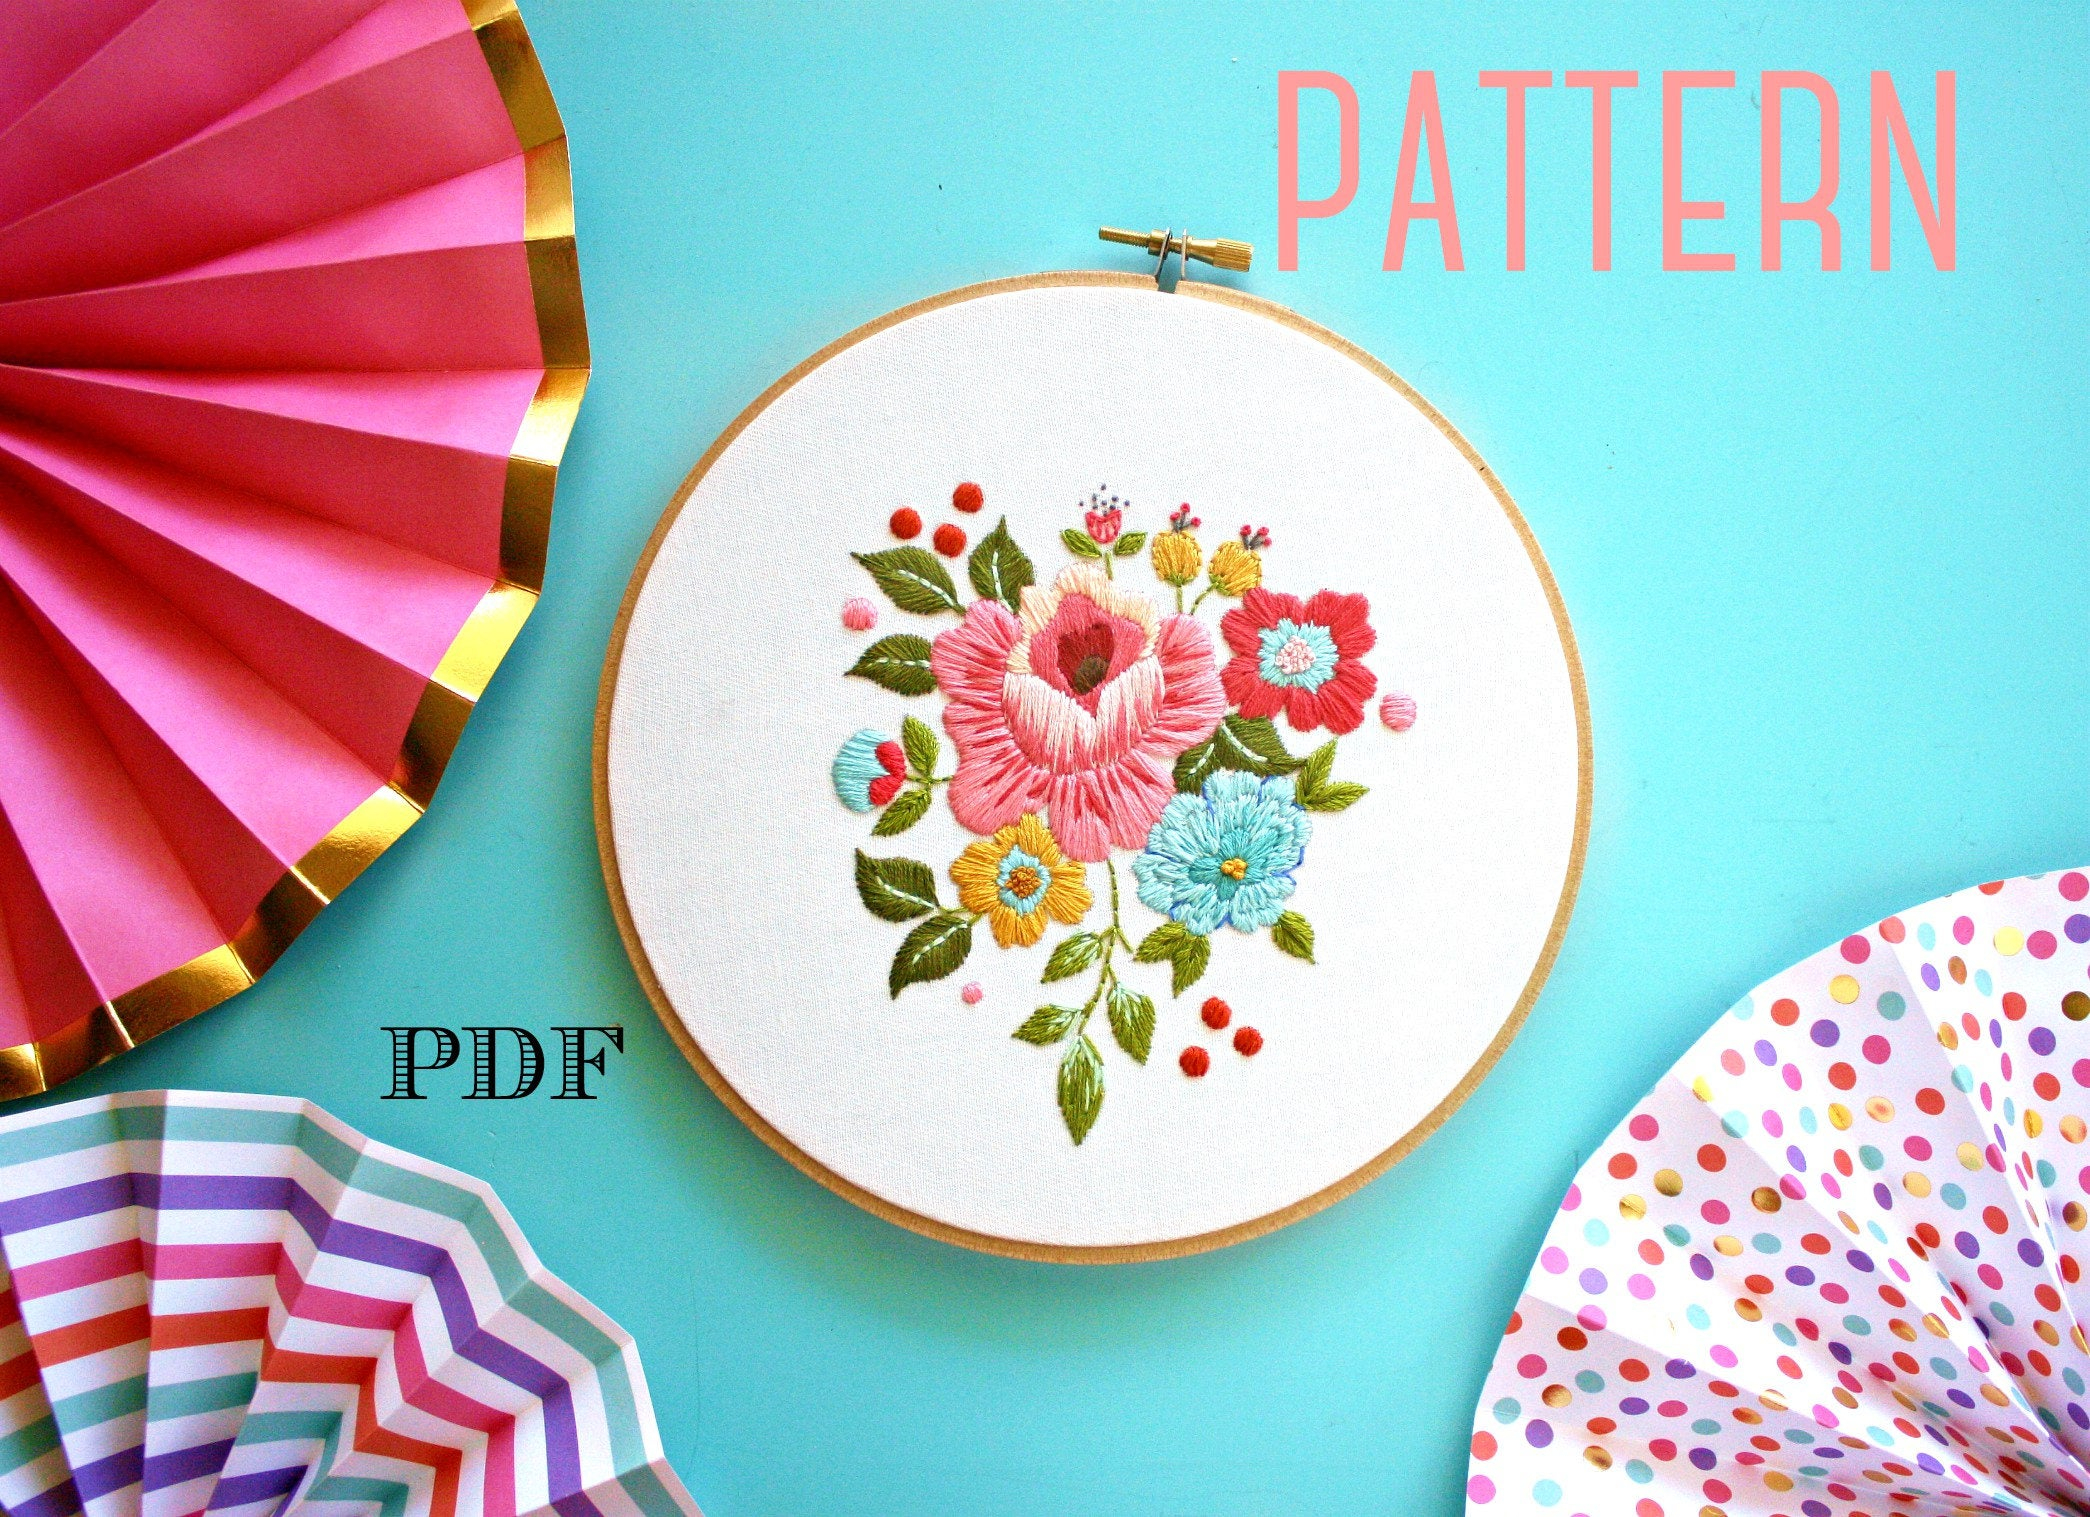 Vintage Floral Embroidery Patterns Floral Embroidery Pattern Vintage Inspired Embroidery Kitinstant Download Pdfhand Embroidery Patternprintable Stitching Pattern